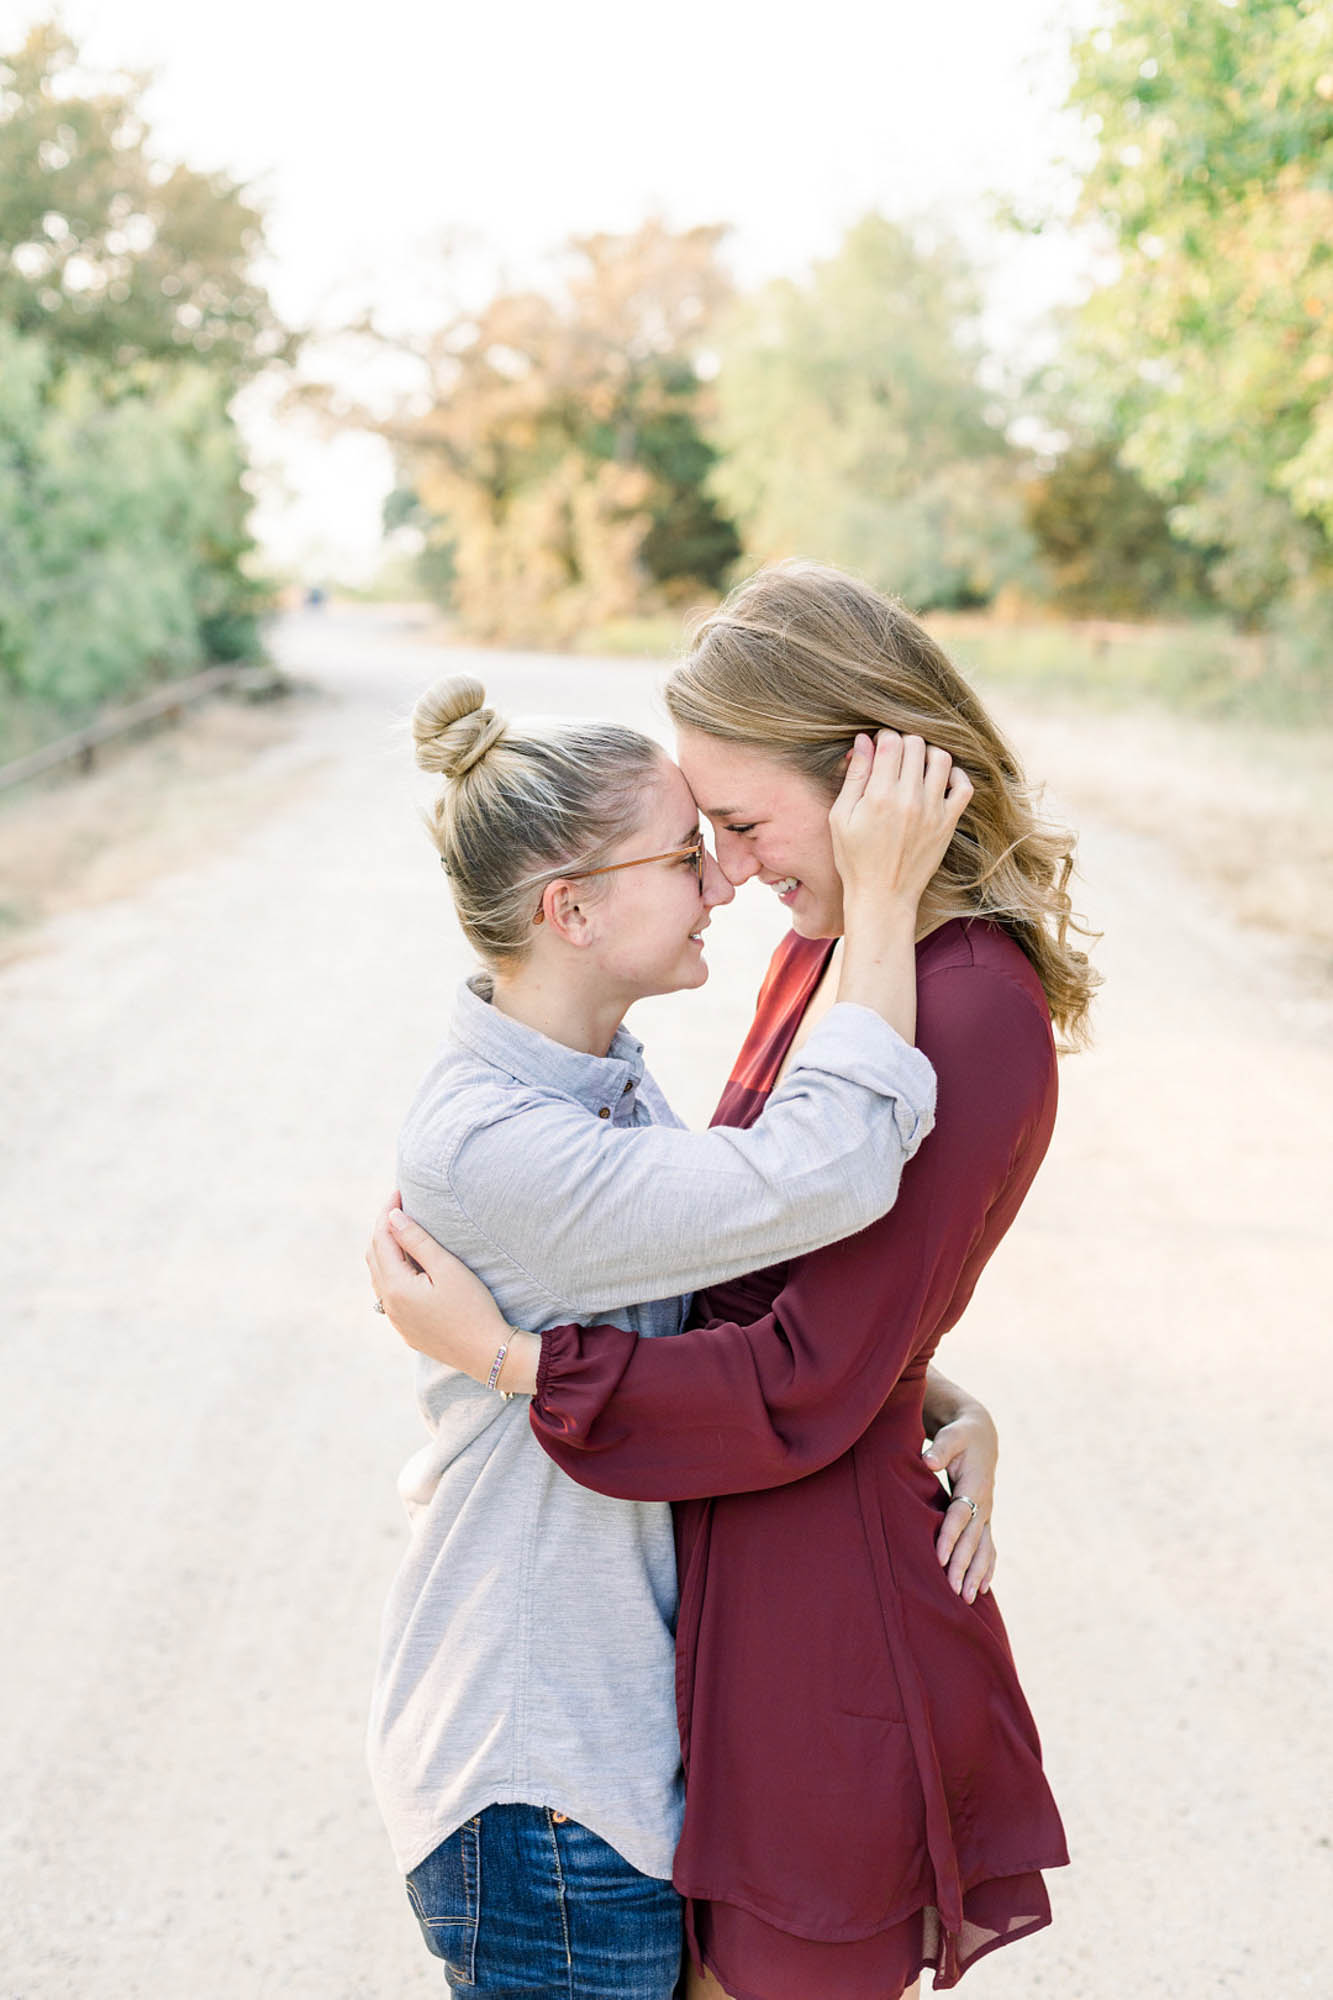 Autumn engagement session in Texas with joyful lake photos | Kimberly Harrell Photography | Featured on Equally Wed, the leading LGBTQ+ wedding magazine